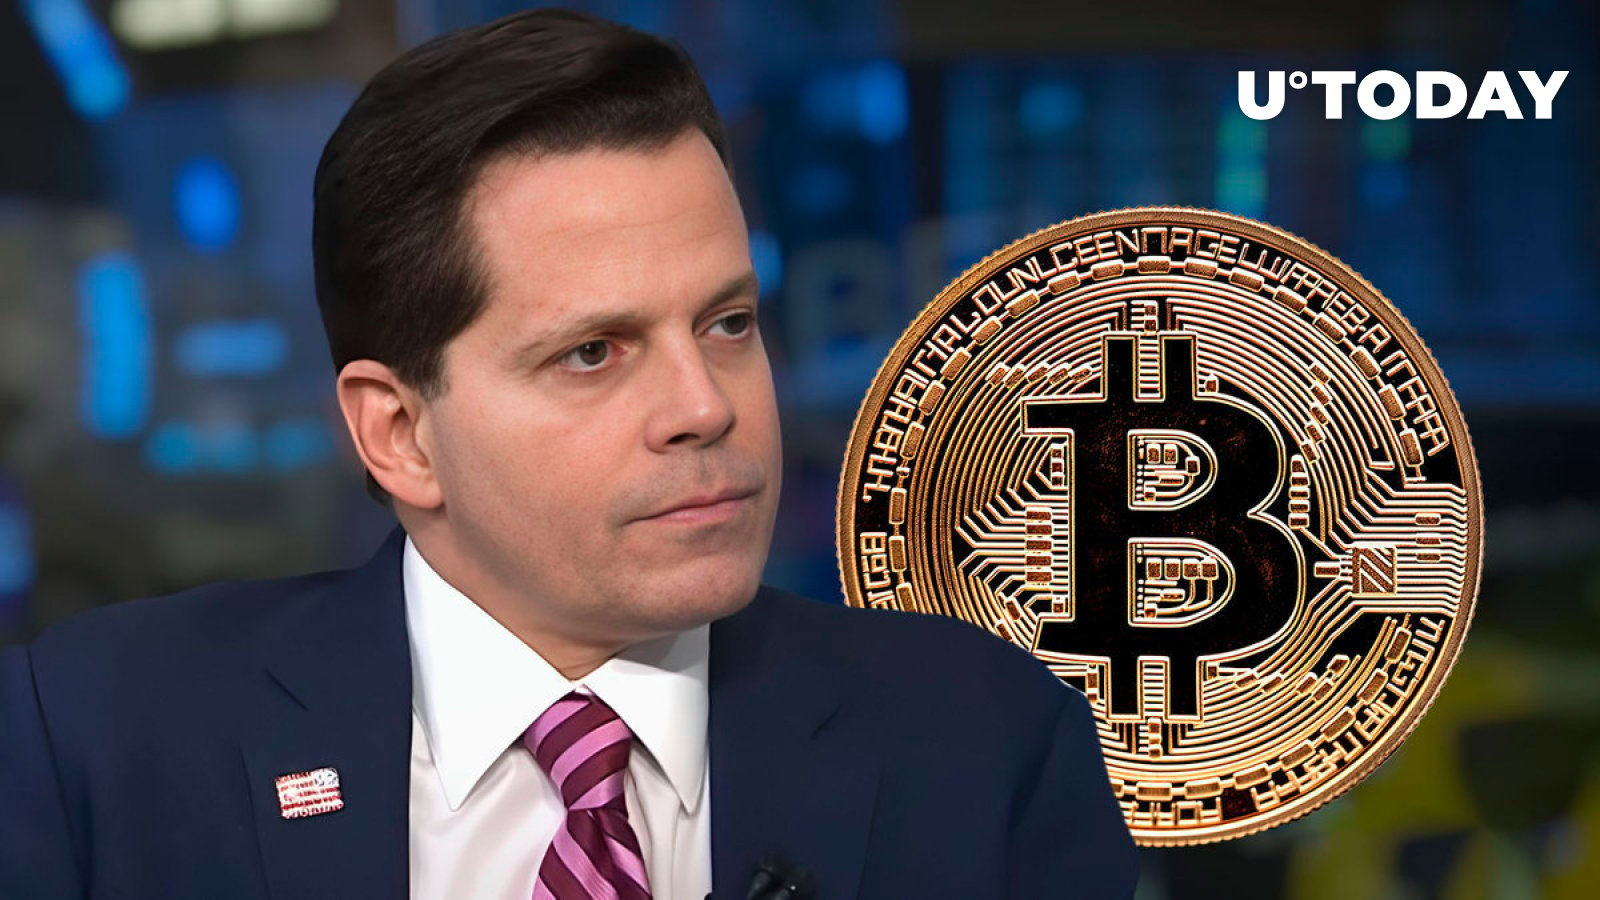 Bitcoin to Become Store of Value by 2026, Says Anthony Scaramucci